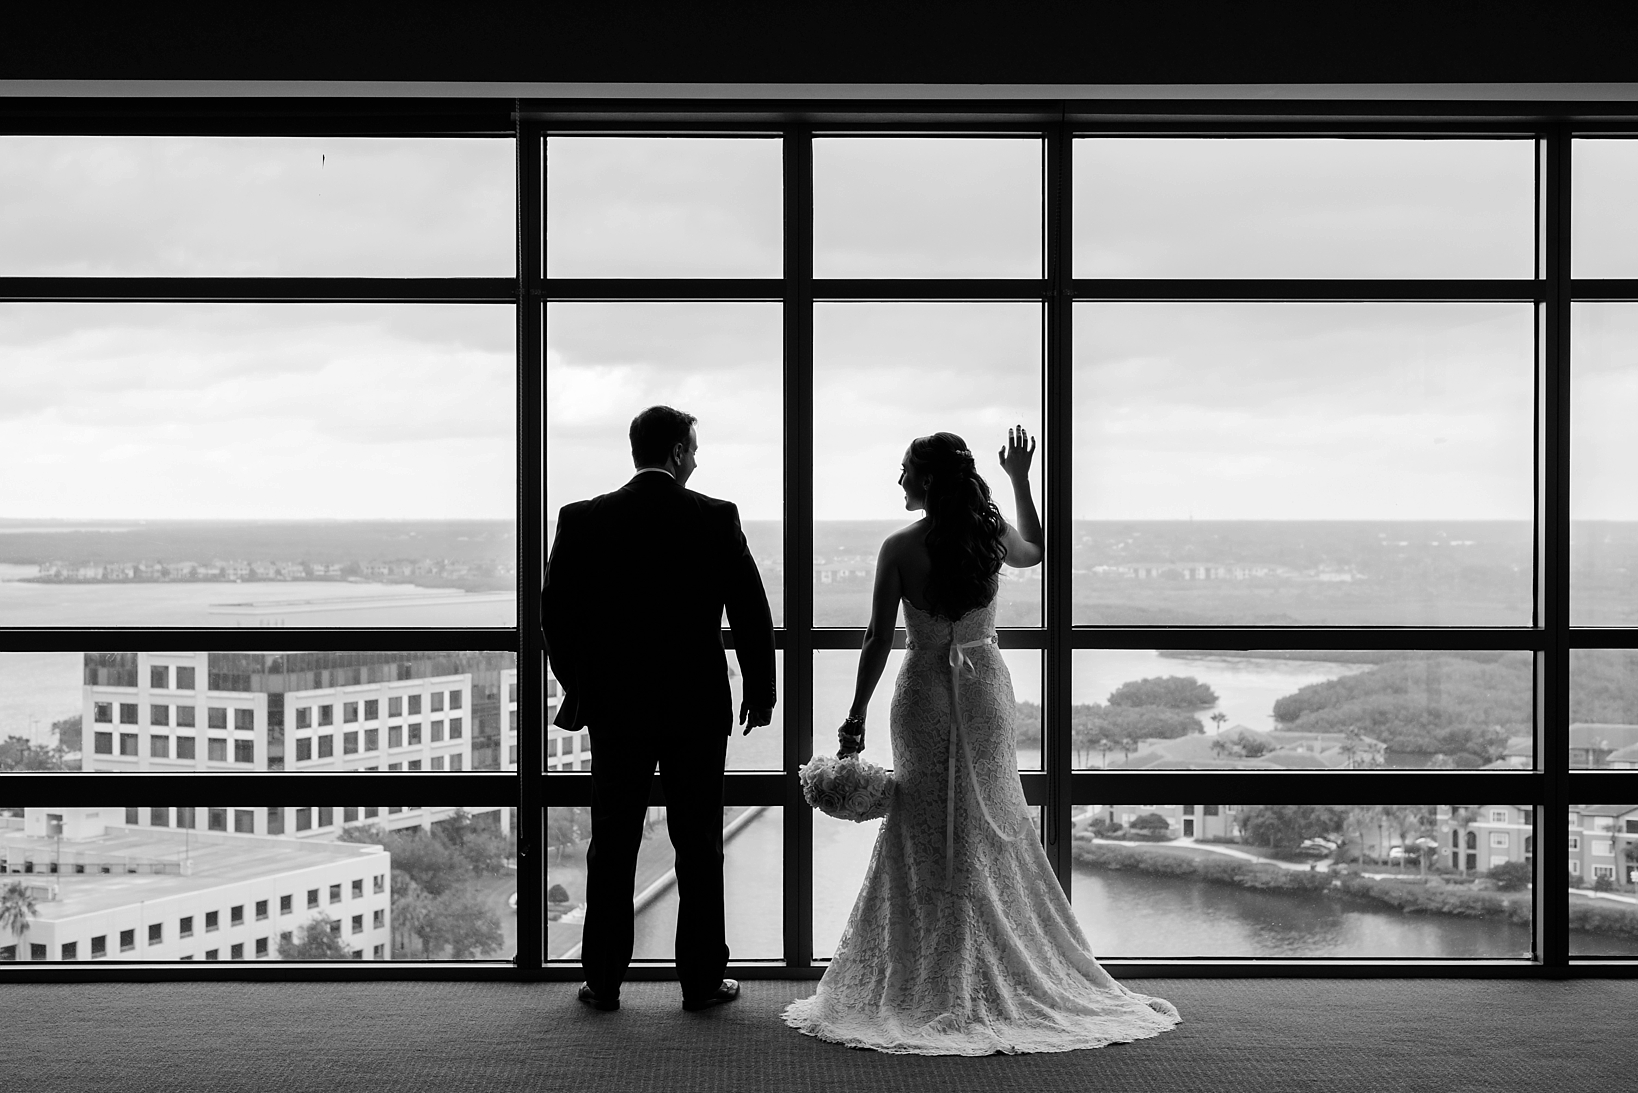 Silhouette of the Bride and Groom in Black and White